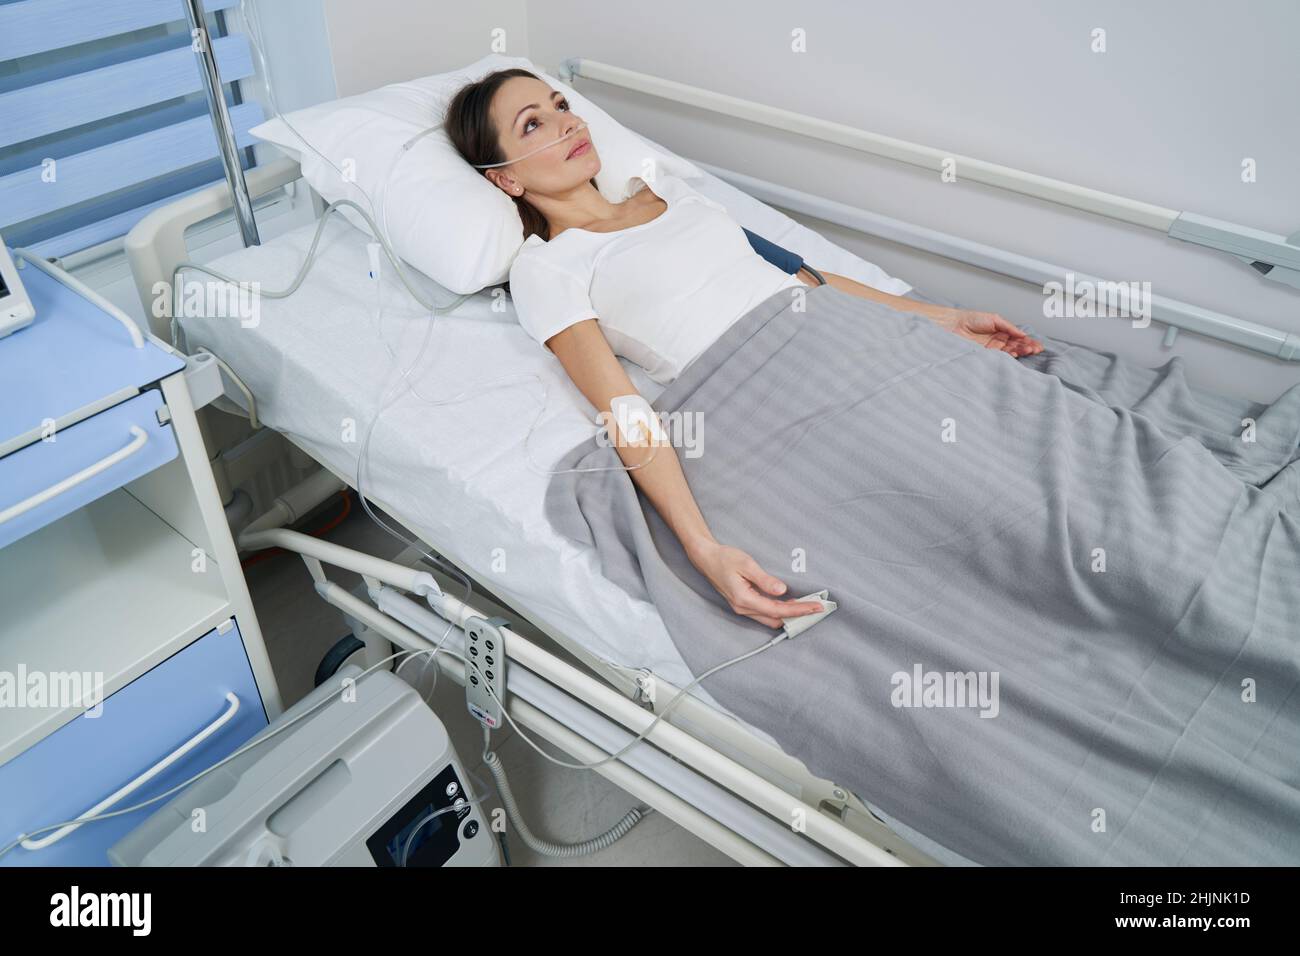 Patient connected to oxygen concentrator during intravenous therapy Stock Photo